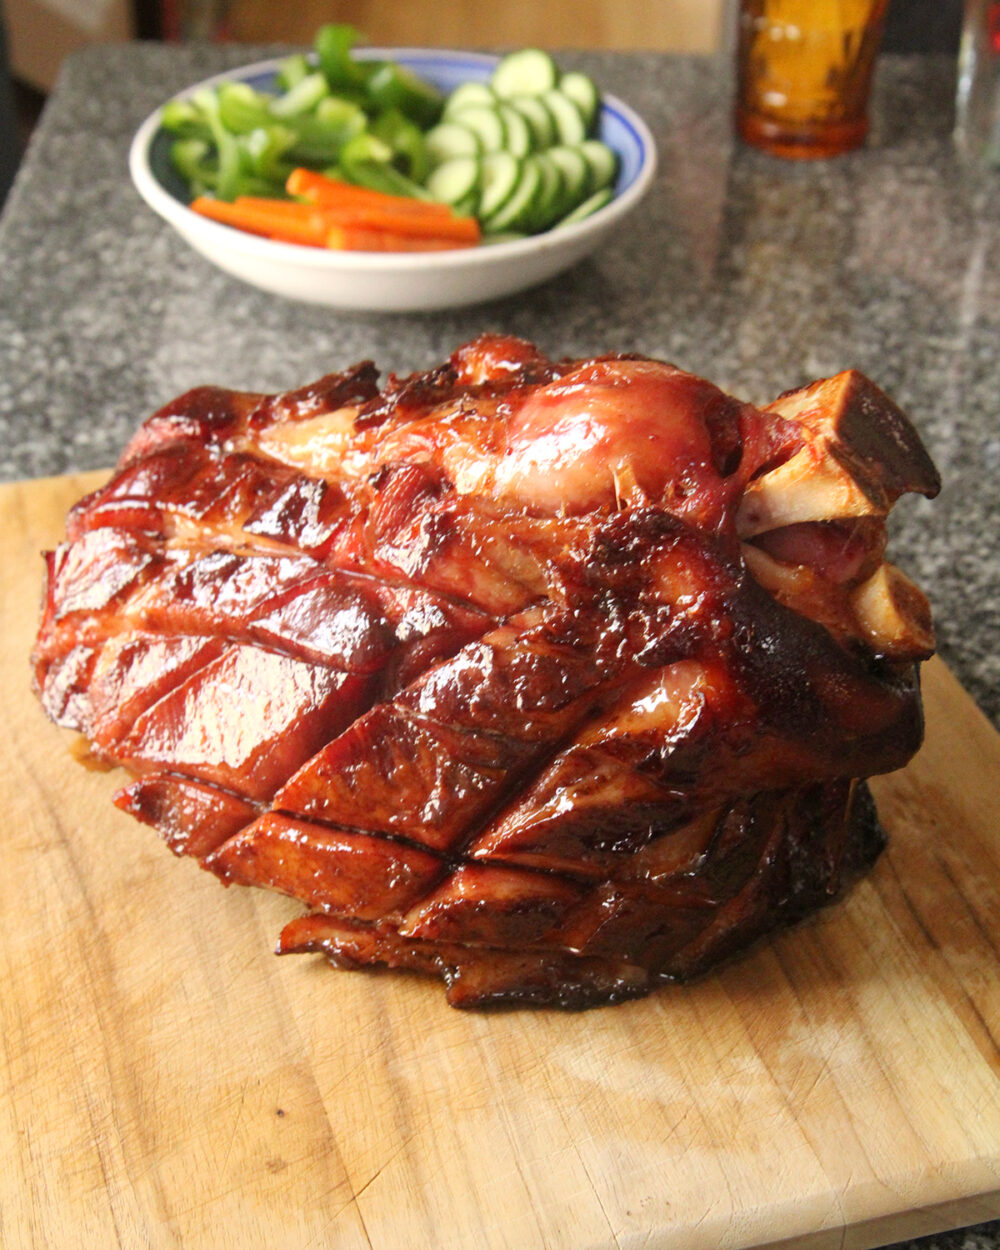 A bone-in ham that has been cut in a diamond pattern and cooked with a rich brown glaze sits on a cutting board. A bowl of cut veggies is in the background along with an amber-colored glass.